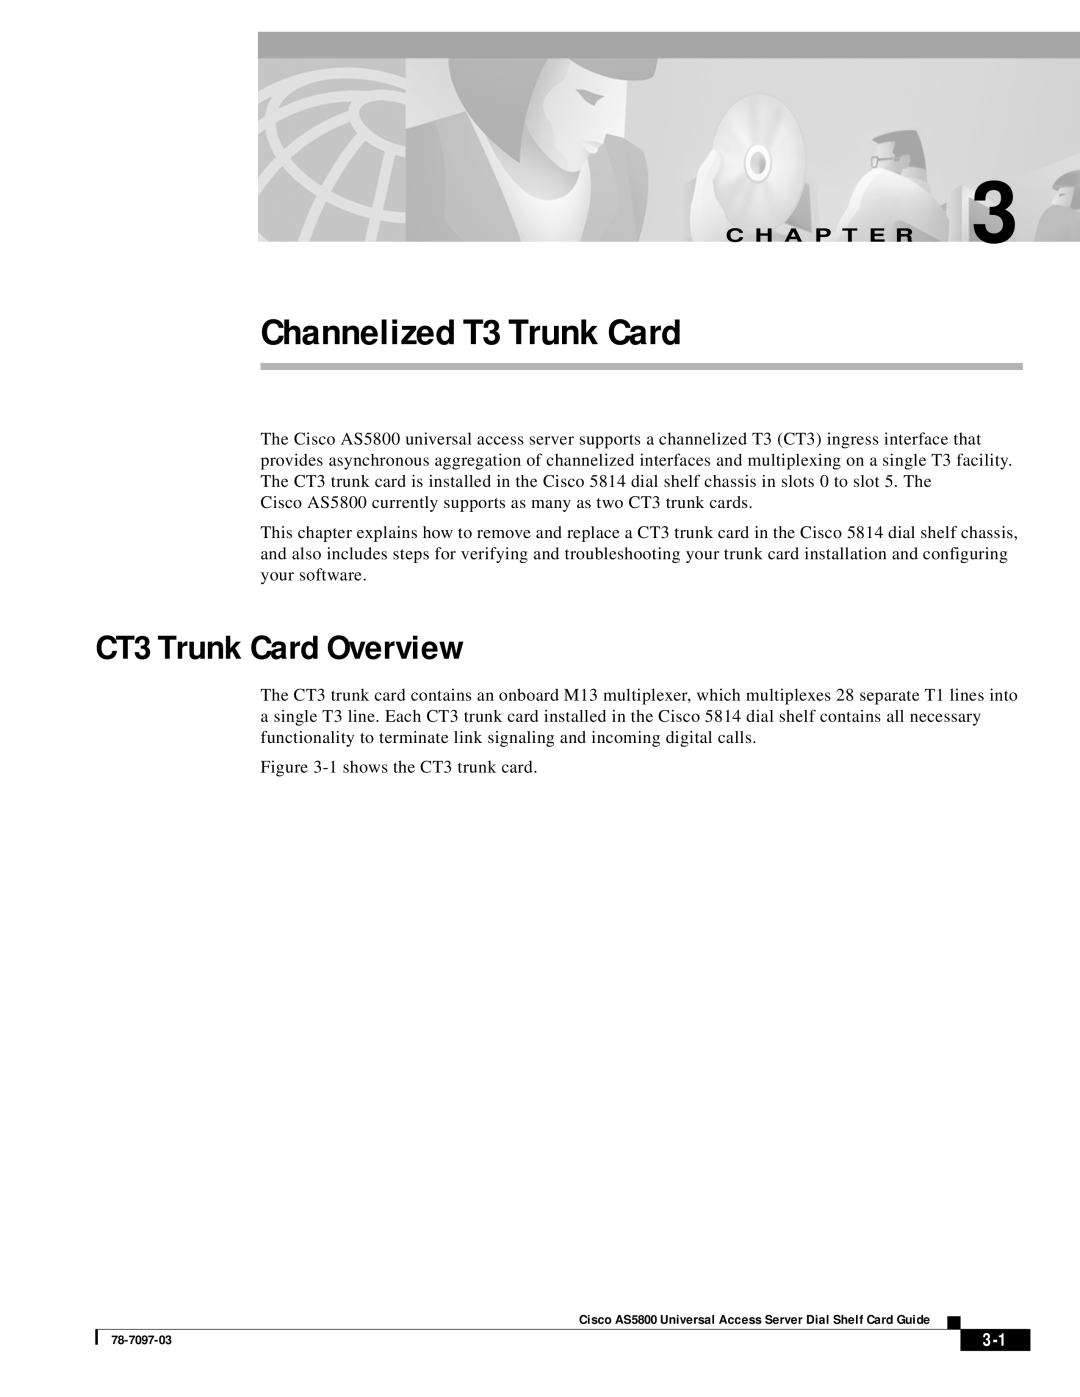 Cisco Systems AS5800 manual CT3 Trunk Card Overview, Channelized T3 Trunk Card, C H A P T E R 